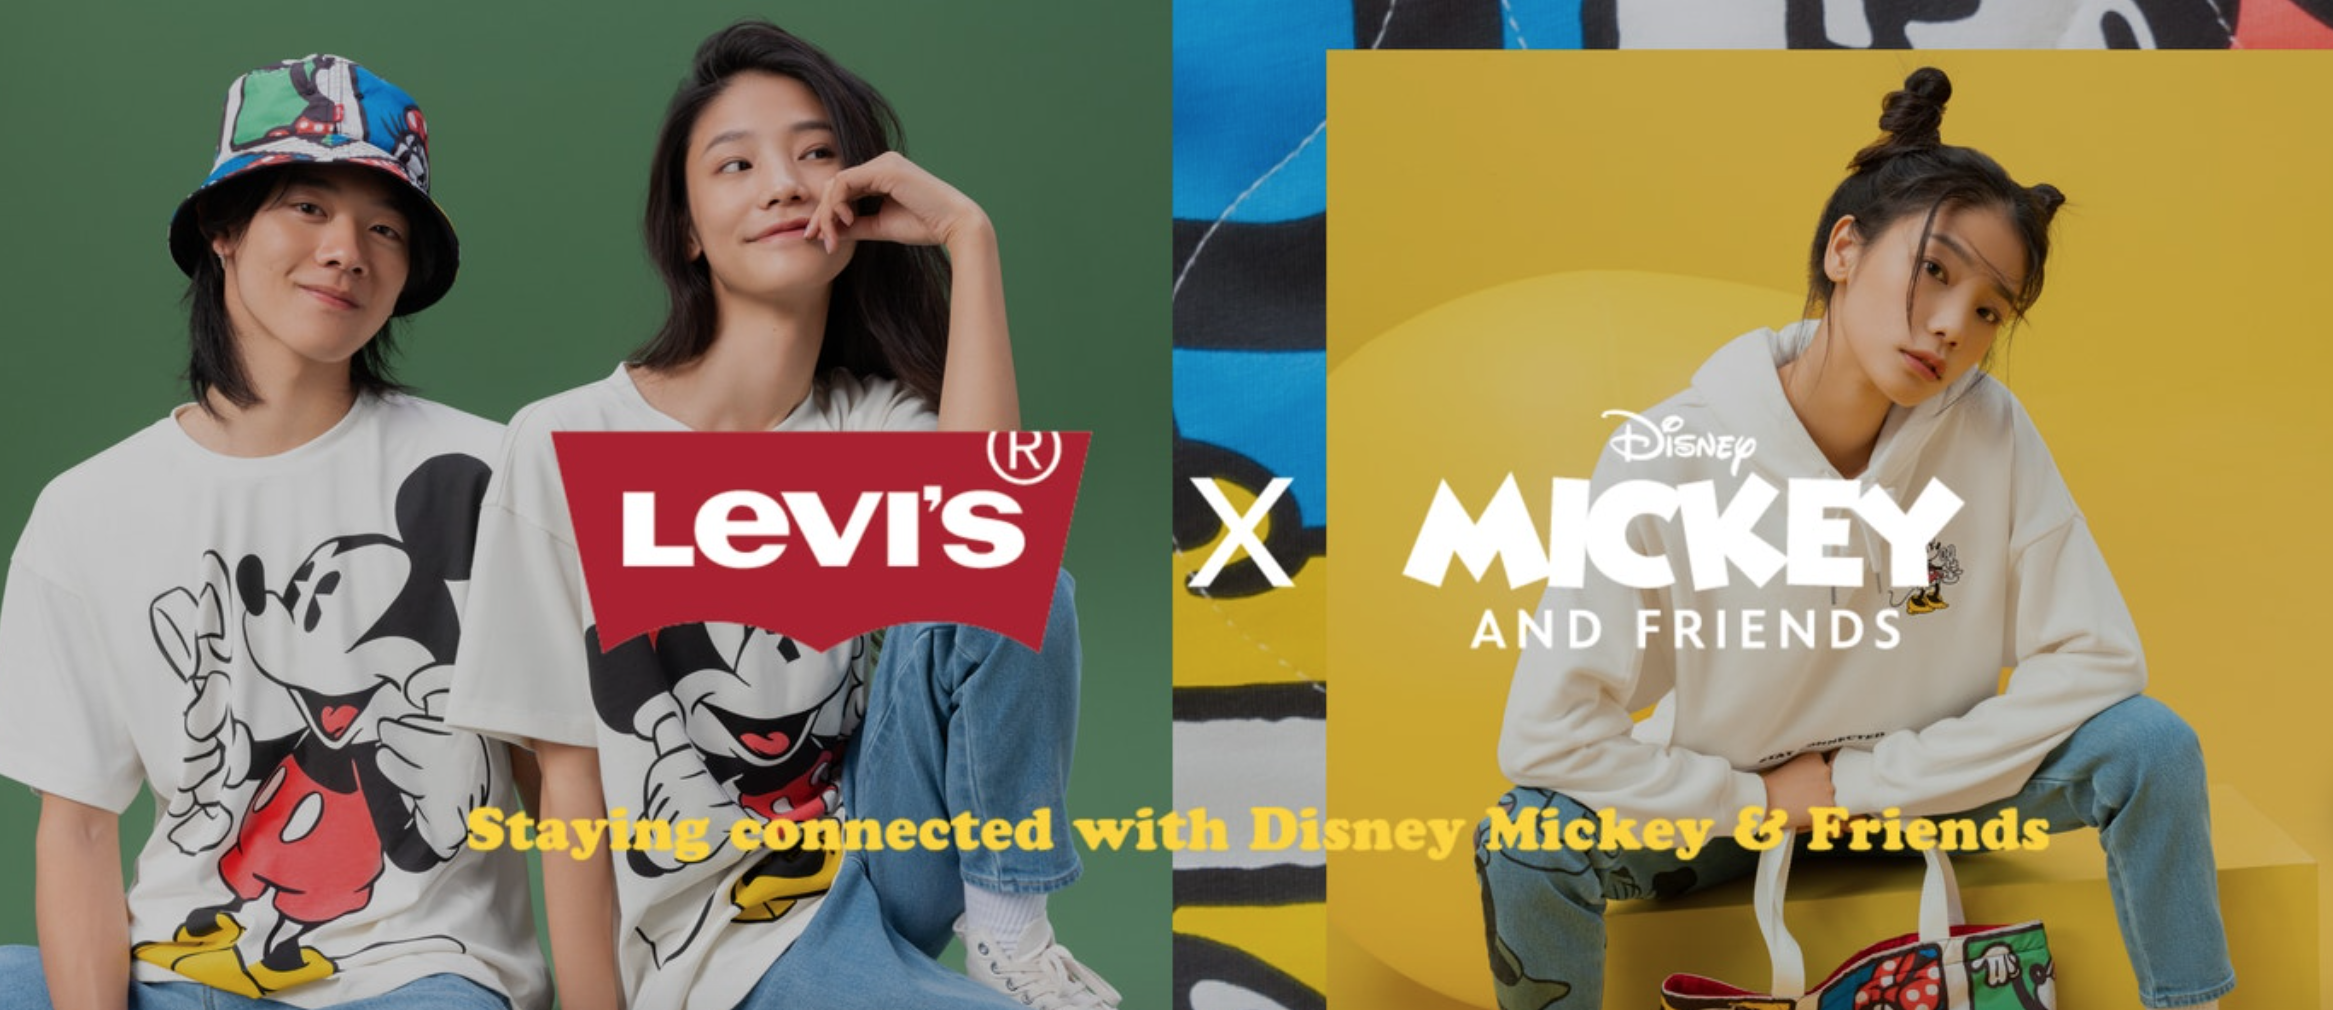 Mickey and Friends Are the Faces of Levi's New Collection in Disney World  and Online! 